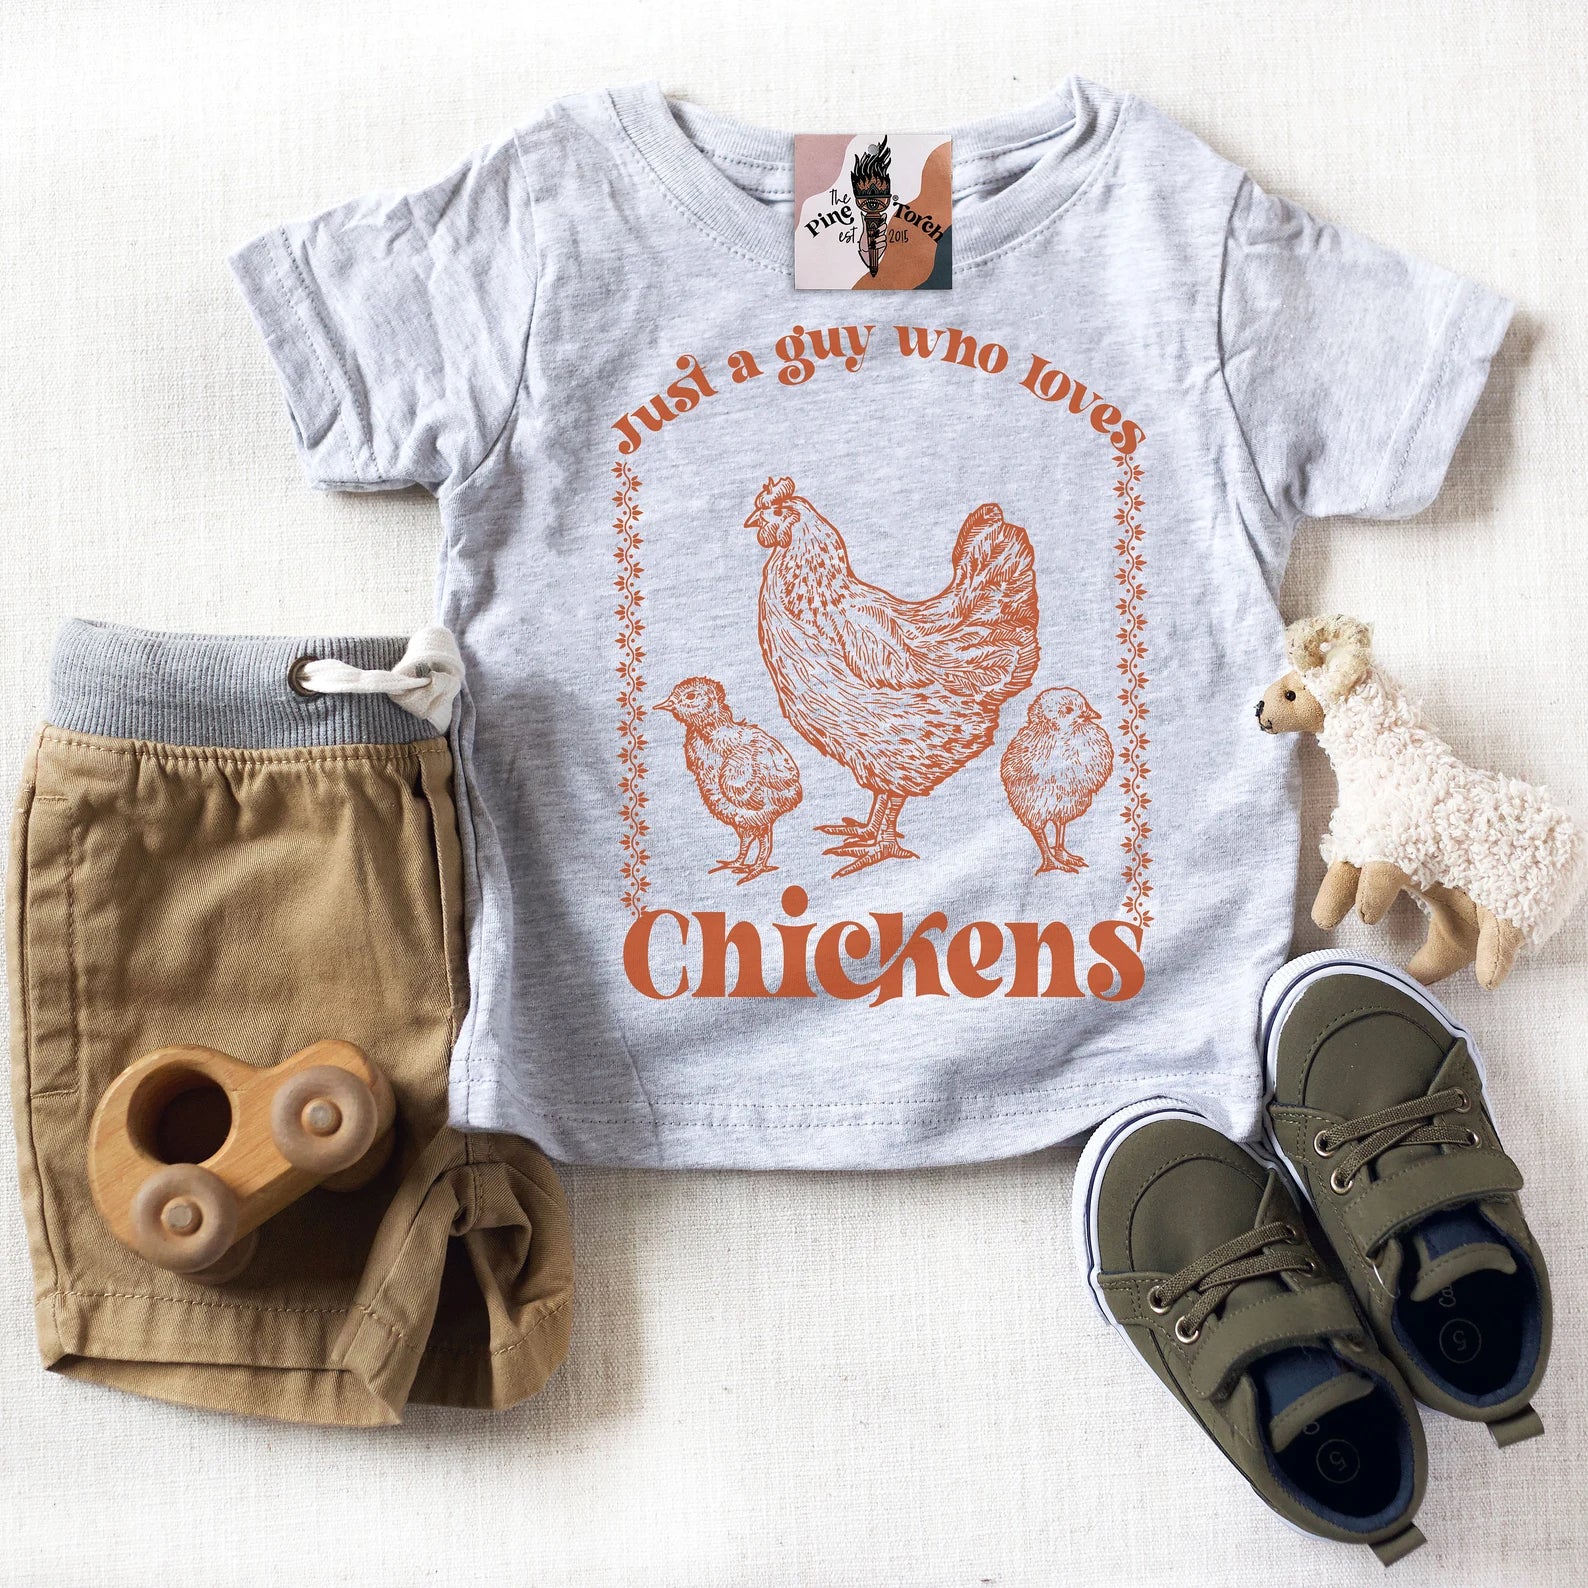 « JUST A KID WHO LOVES CHICKENS » KIDS TEE